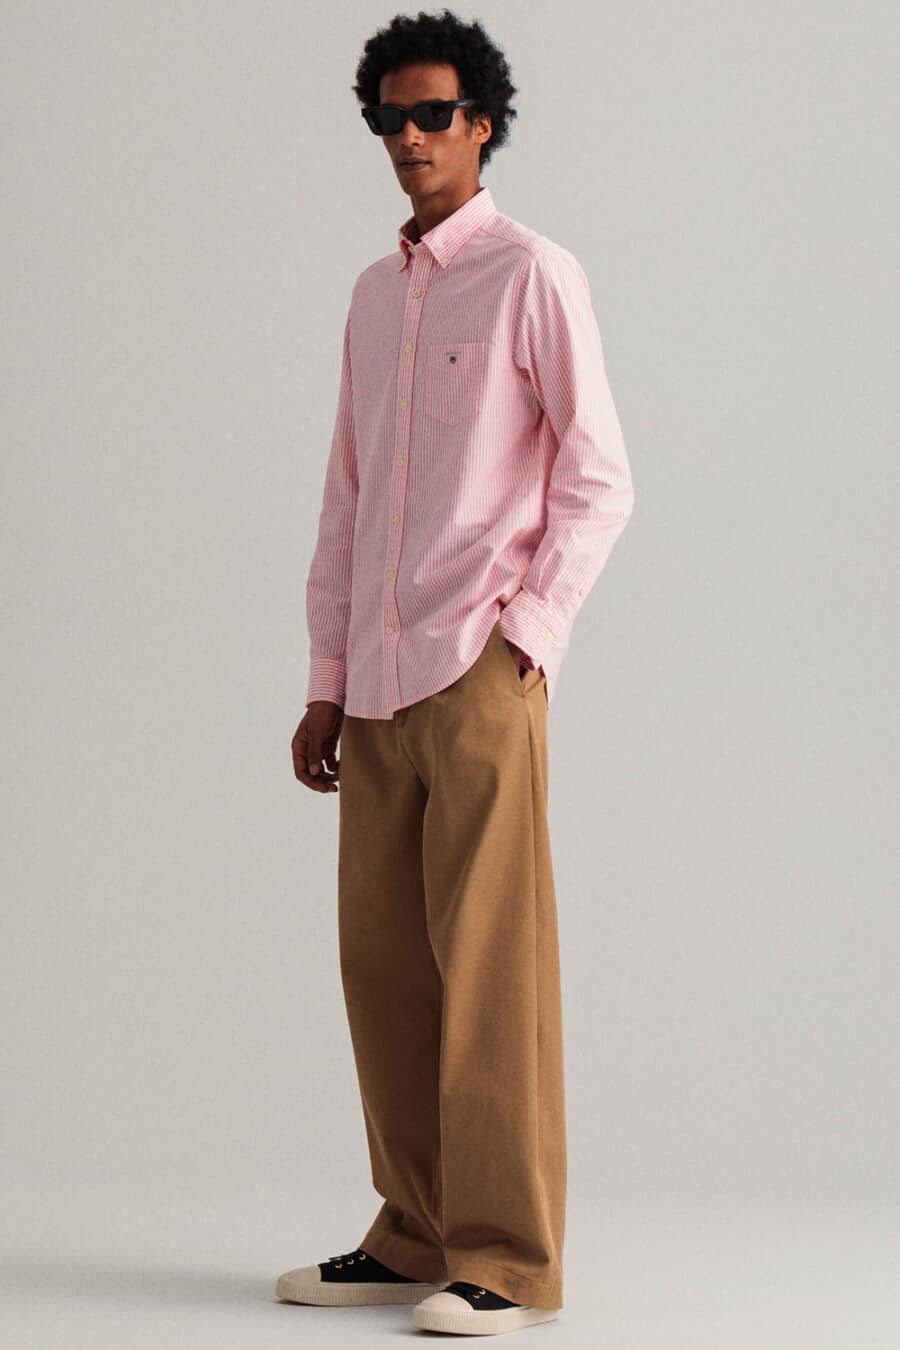 Men's loose brown pants, light pink shirt and canvas sneakers outfit